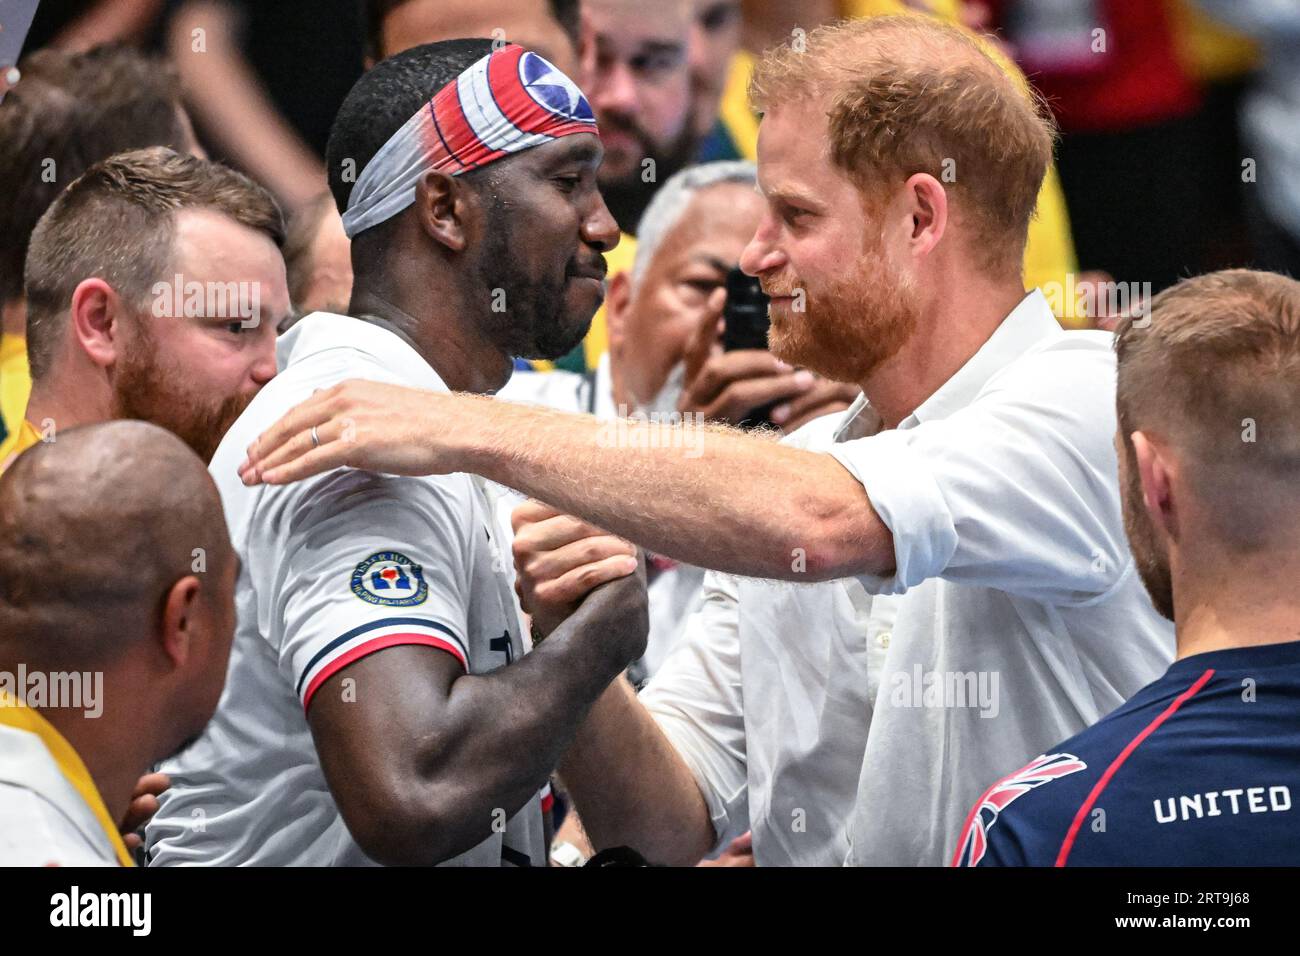 Düsseldorf, Germany. 11th Sep, 2023. Harry hugs  Tech Sgt. Kevin Greene, Captain of Team US. The Duke of Sussex, Prince Harry watches the game and interacts with invitees, fans, children and even a UK athlete's sausage dog, before handing Team USA their gold medals after their win. Team United Kingdom play Team USA in the wheelchair rugby finals at the Spiel Merkur arena this evening. Day 2 of the Invictus Games Düsseldorf in and around the Merkur Spiel Arena. Credit: Imageplotter/Alamy Live News Stock Photo